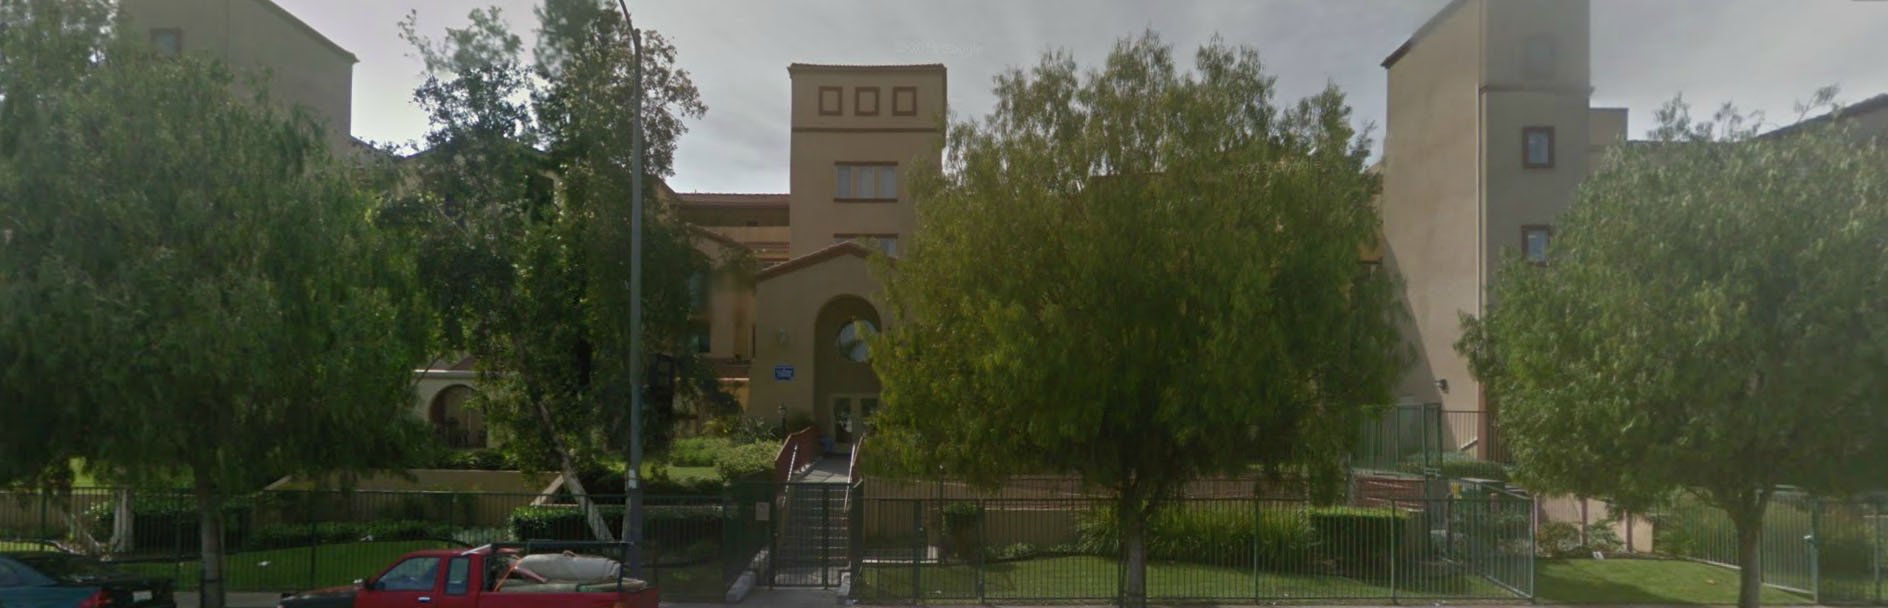 Front view of large light brown building. Front is gated. There is a grass area behind the fence with with bushes and a tree. There are stairs that lead to the building's entrance with handlebars on both sides. Three trees sit on the sidewalk in front of